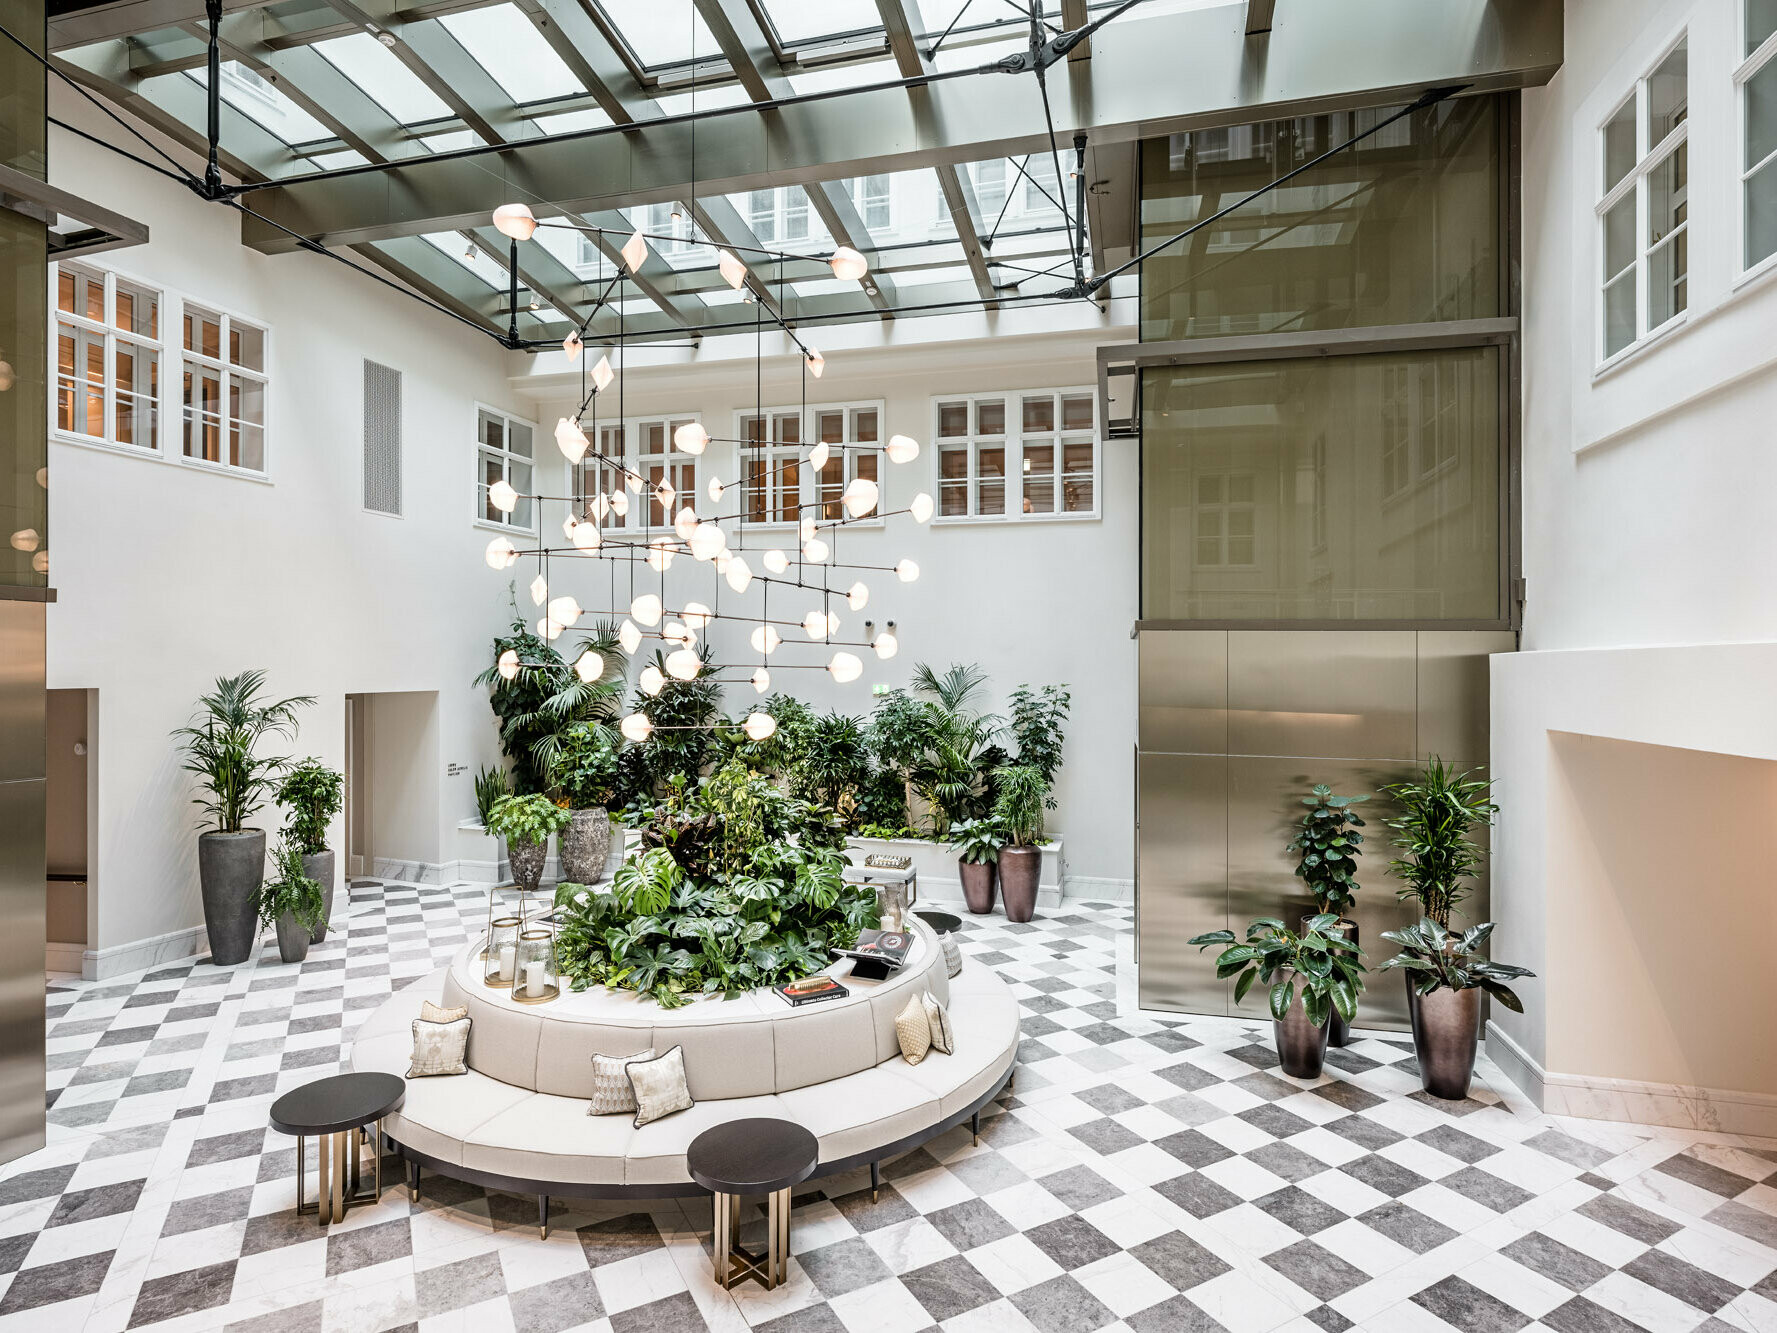 Interior of the luxury hotel, where the colours bronze, grey and white dominate: There are seating areas and larger potted plants on a marble floor, a modern lamp is hanging down into the room from the ceiling.